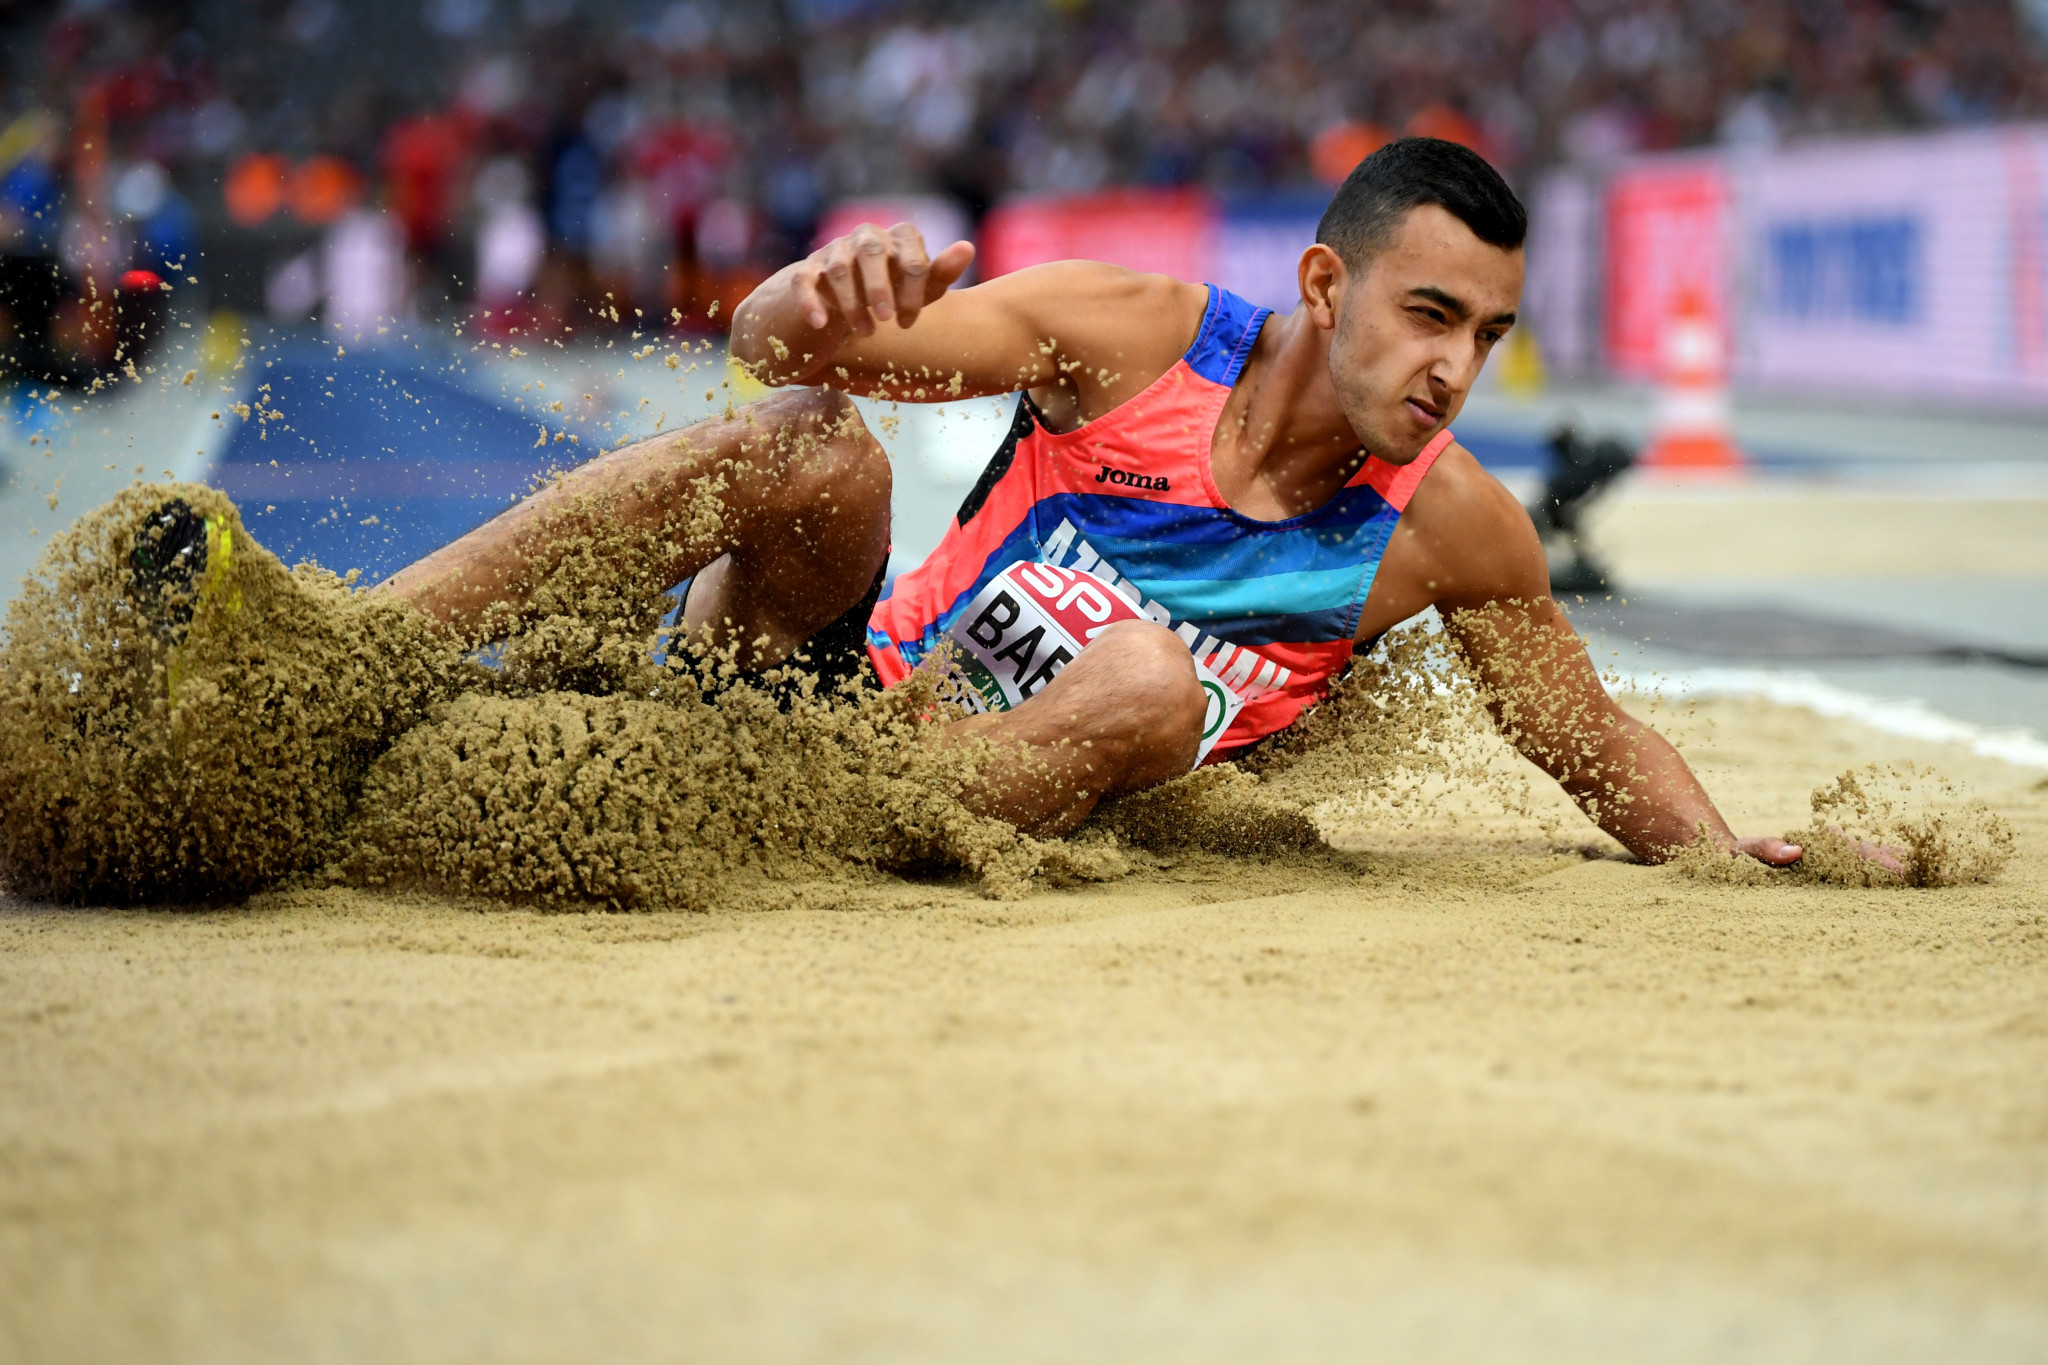 Nazim Babayev won the triple jump event at the Naples 2019 Summer Universiade ©Getty Images